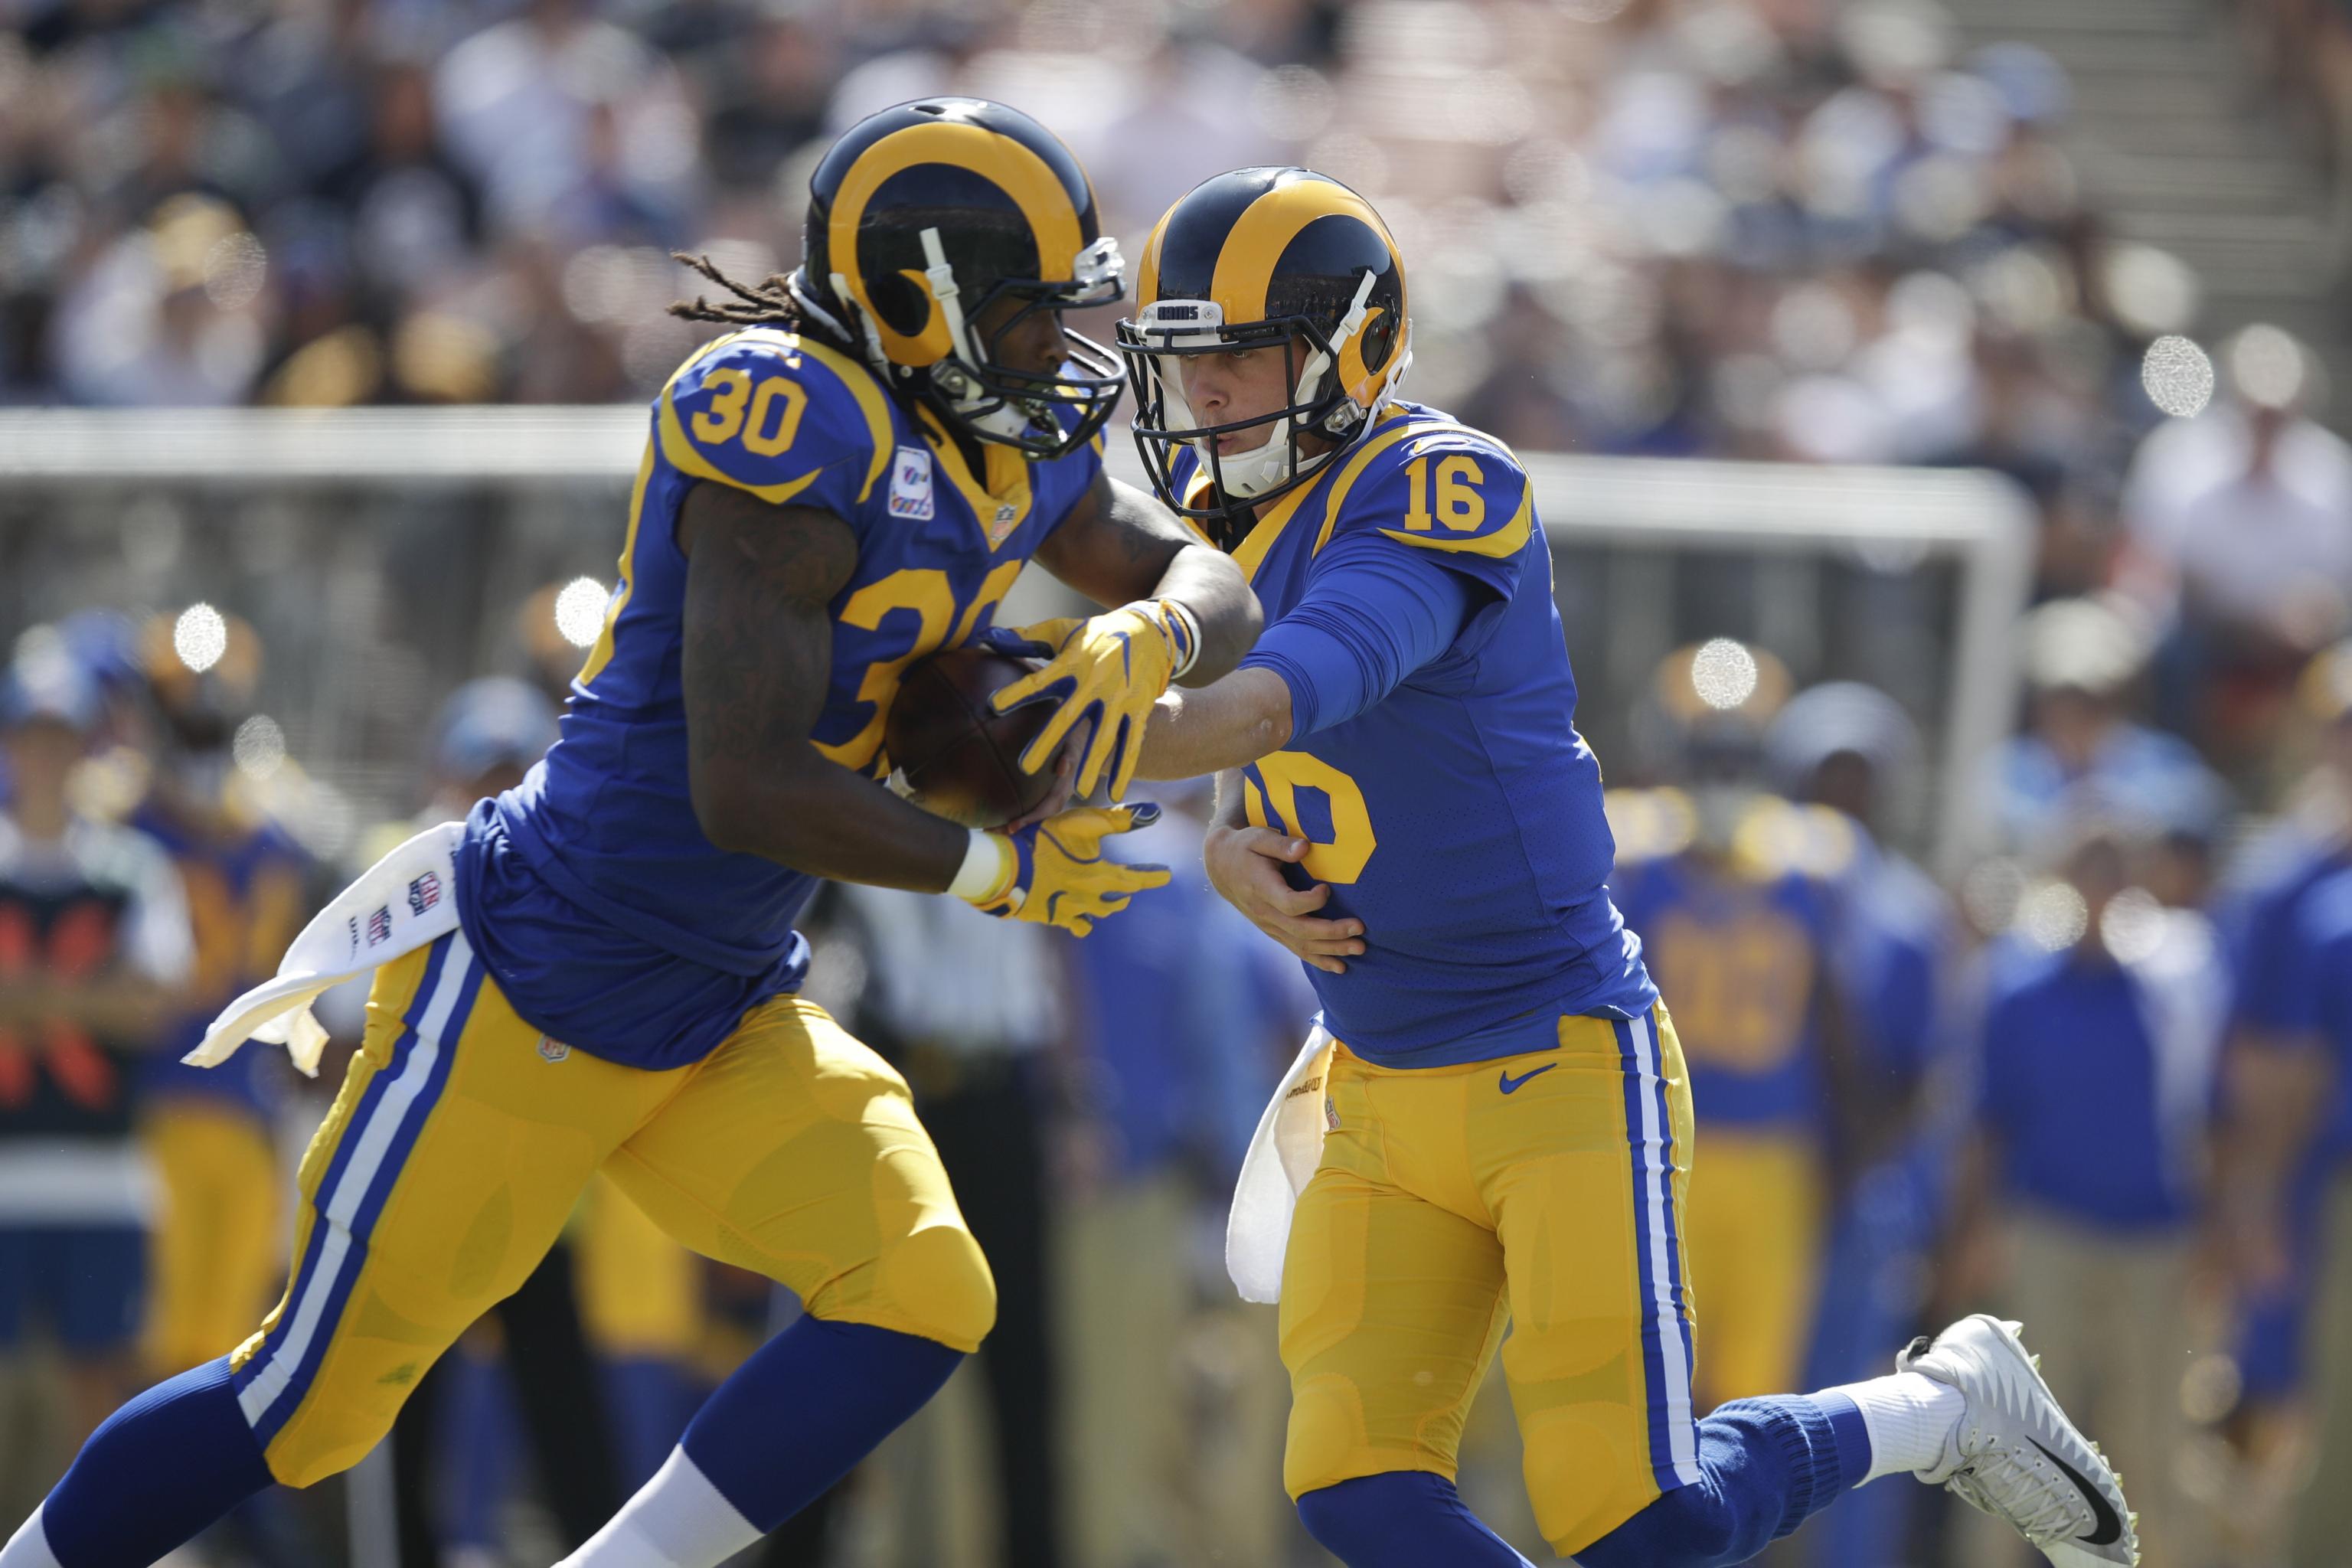 Rams Announce They Will Wear Throwback Uniforms in 5 Games in 2018